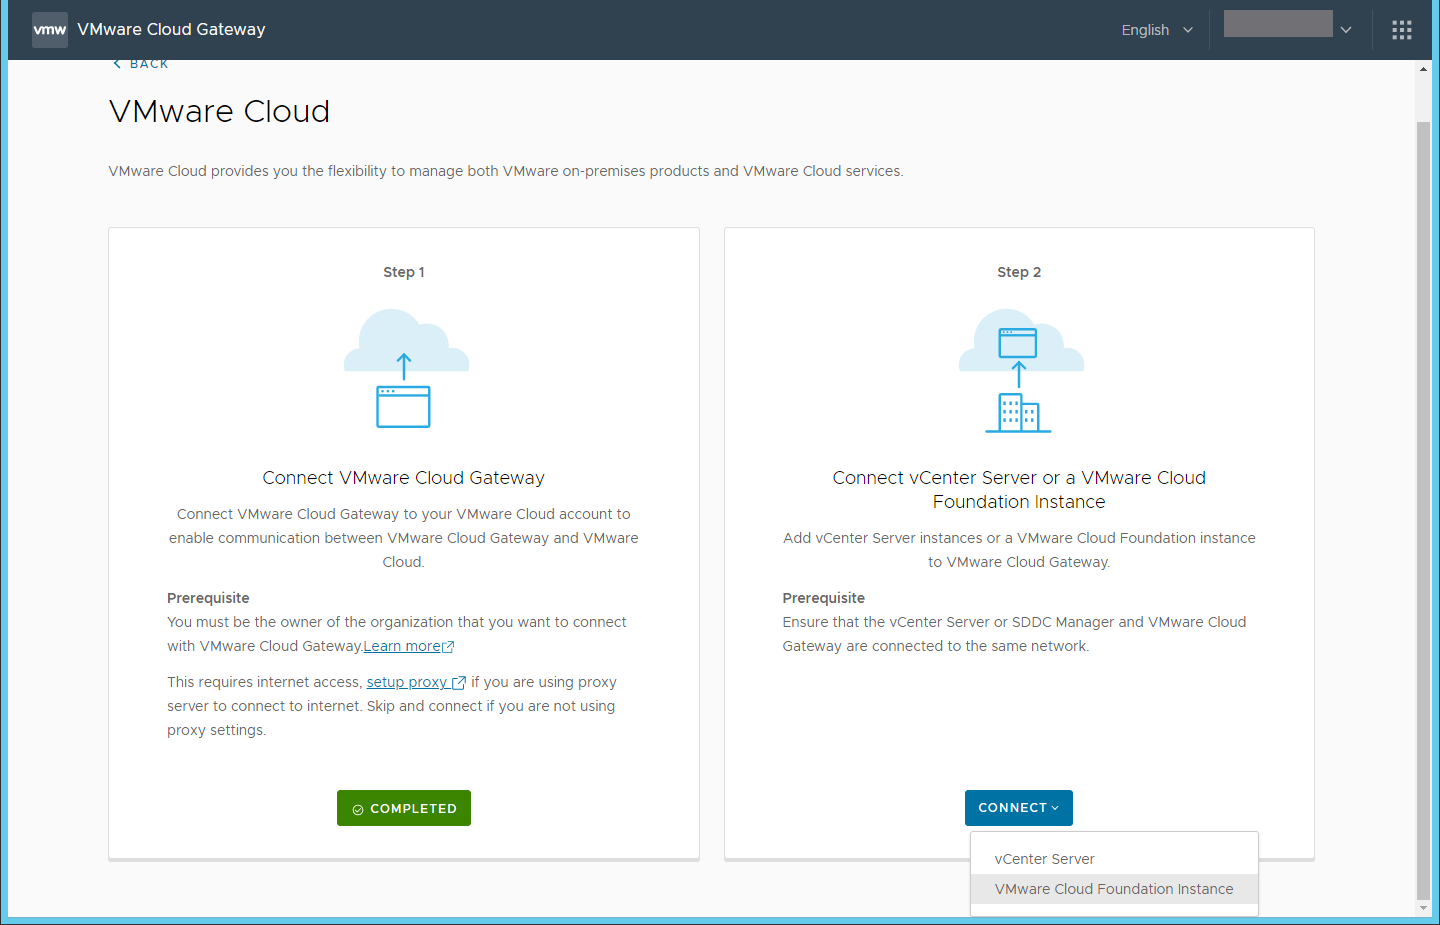 The right card represents the task to connect the cloud gateway to SDDC Manager. In it, select Connect and then VMware Cloud Foundation Instance.